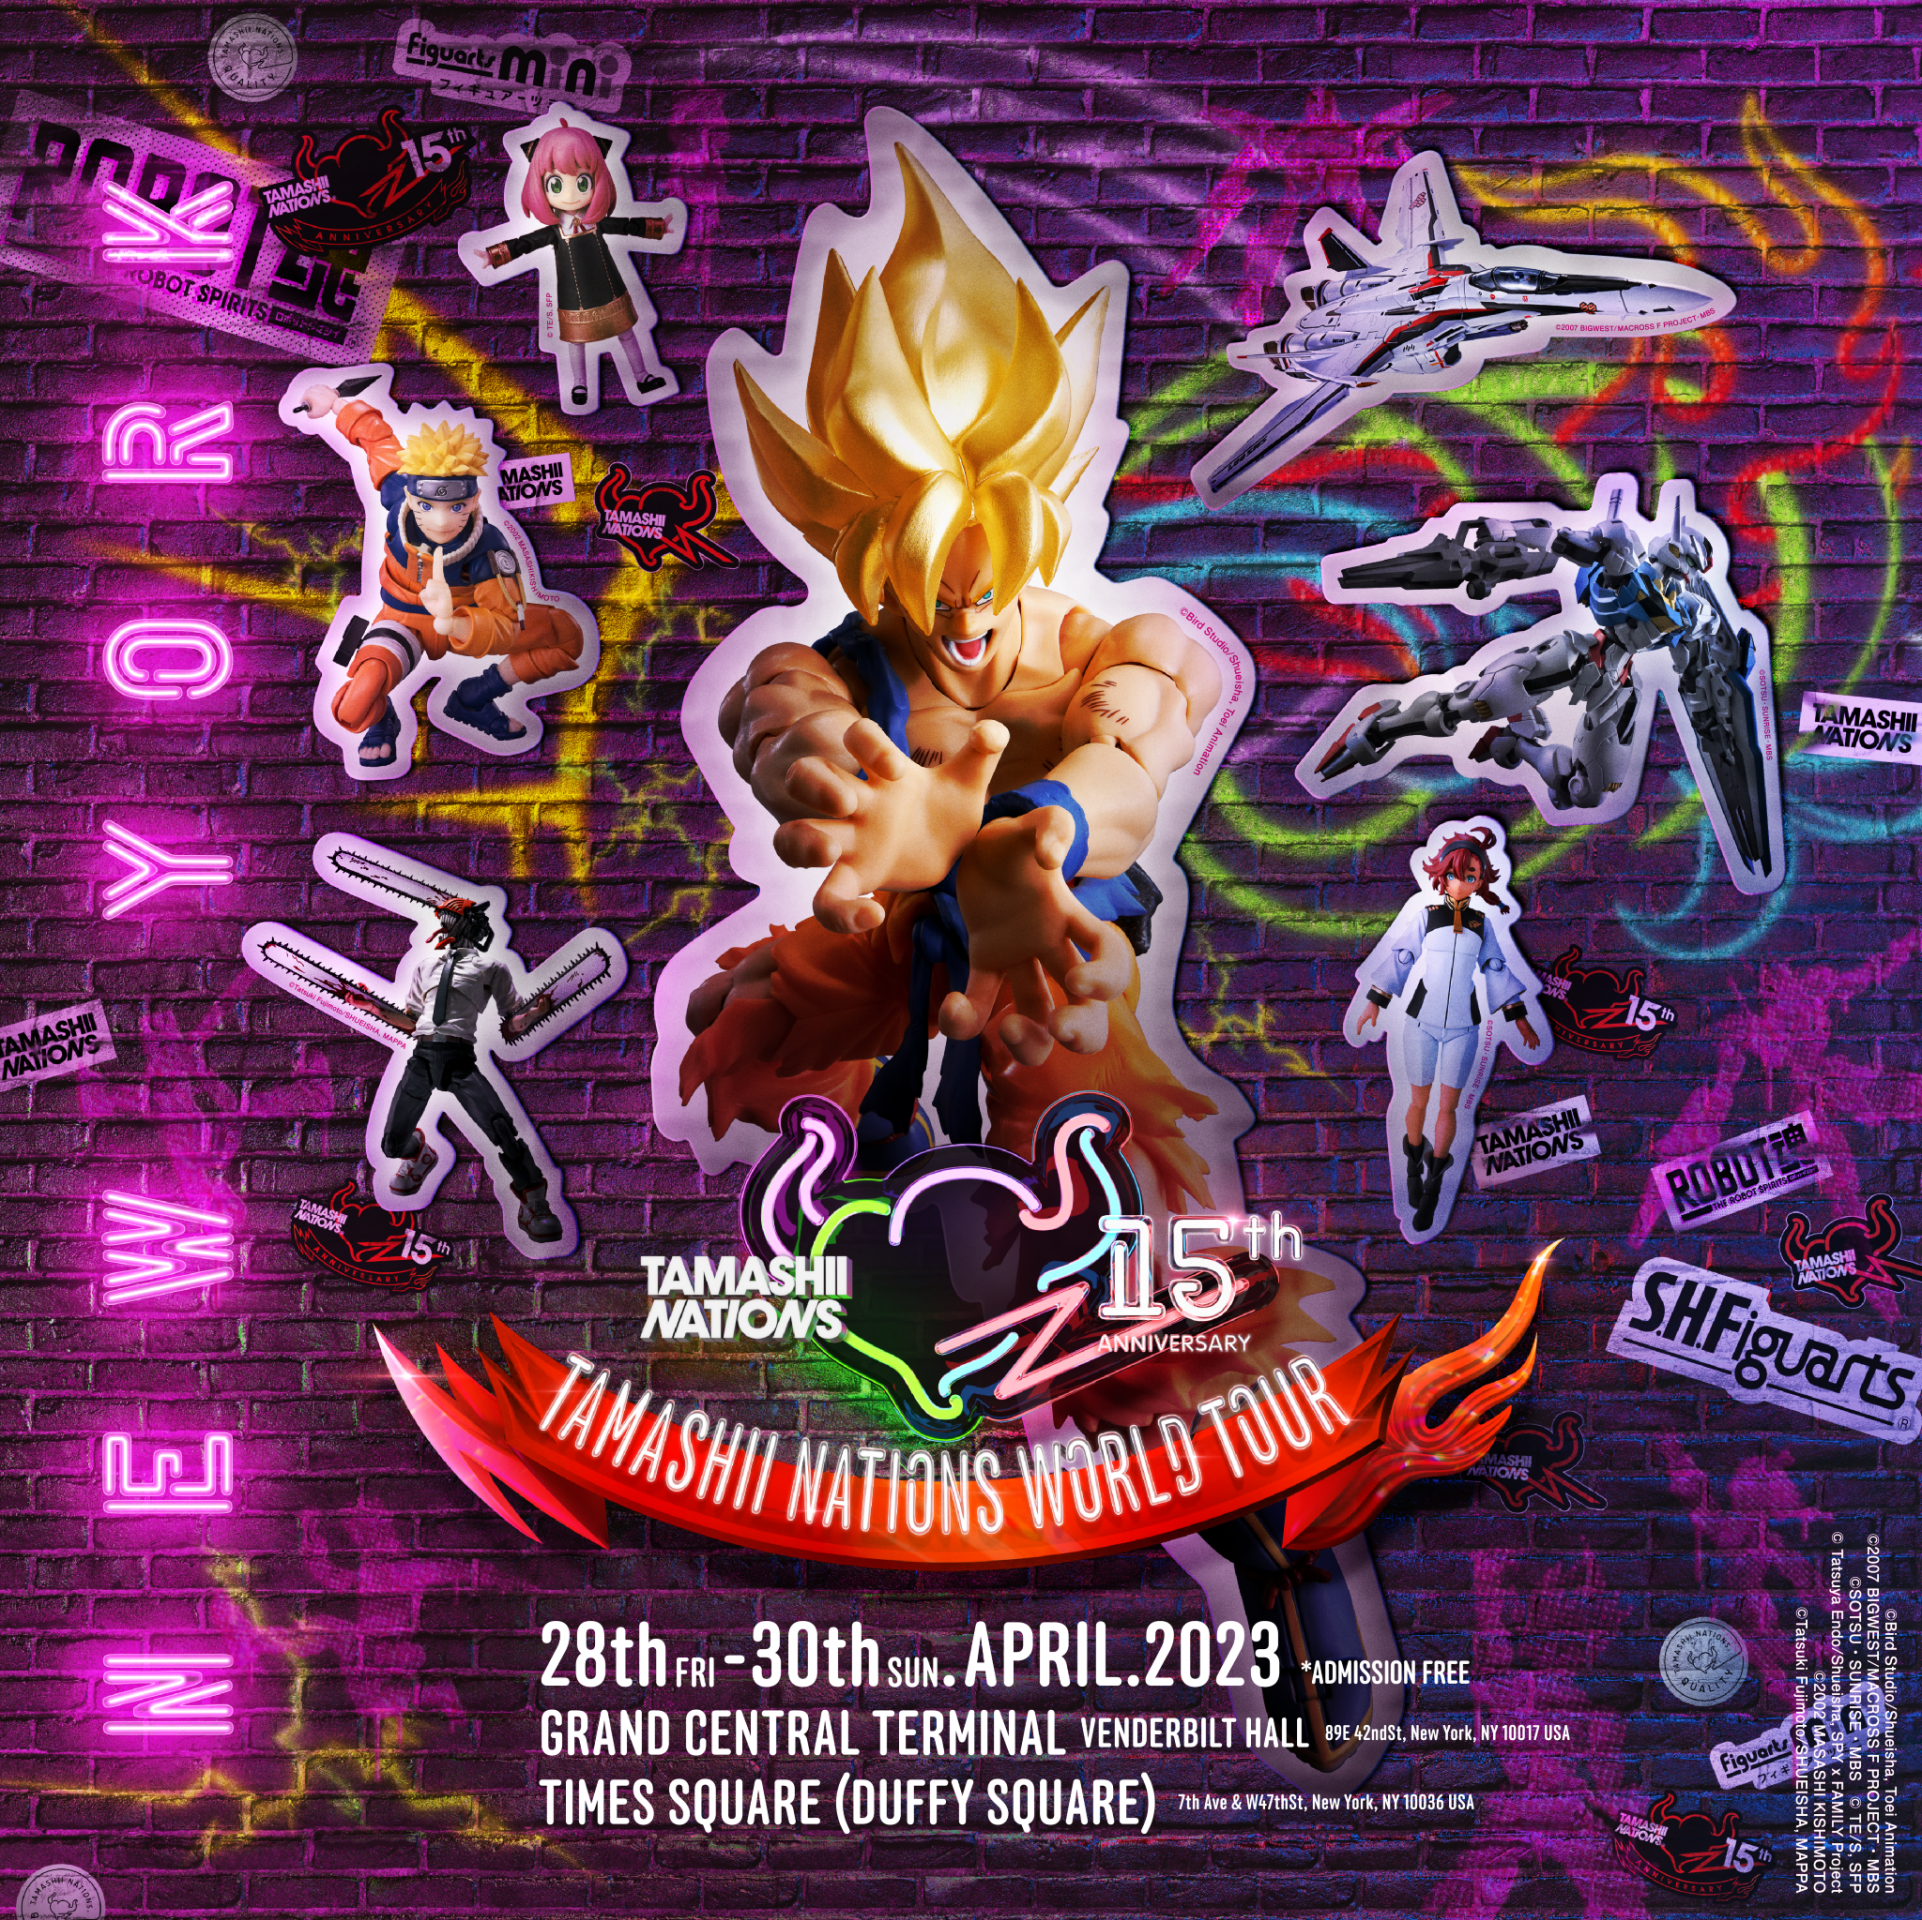 Tour Event Coming to Celebrate the 15th Anniversary of TAMASHII NATIONS!